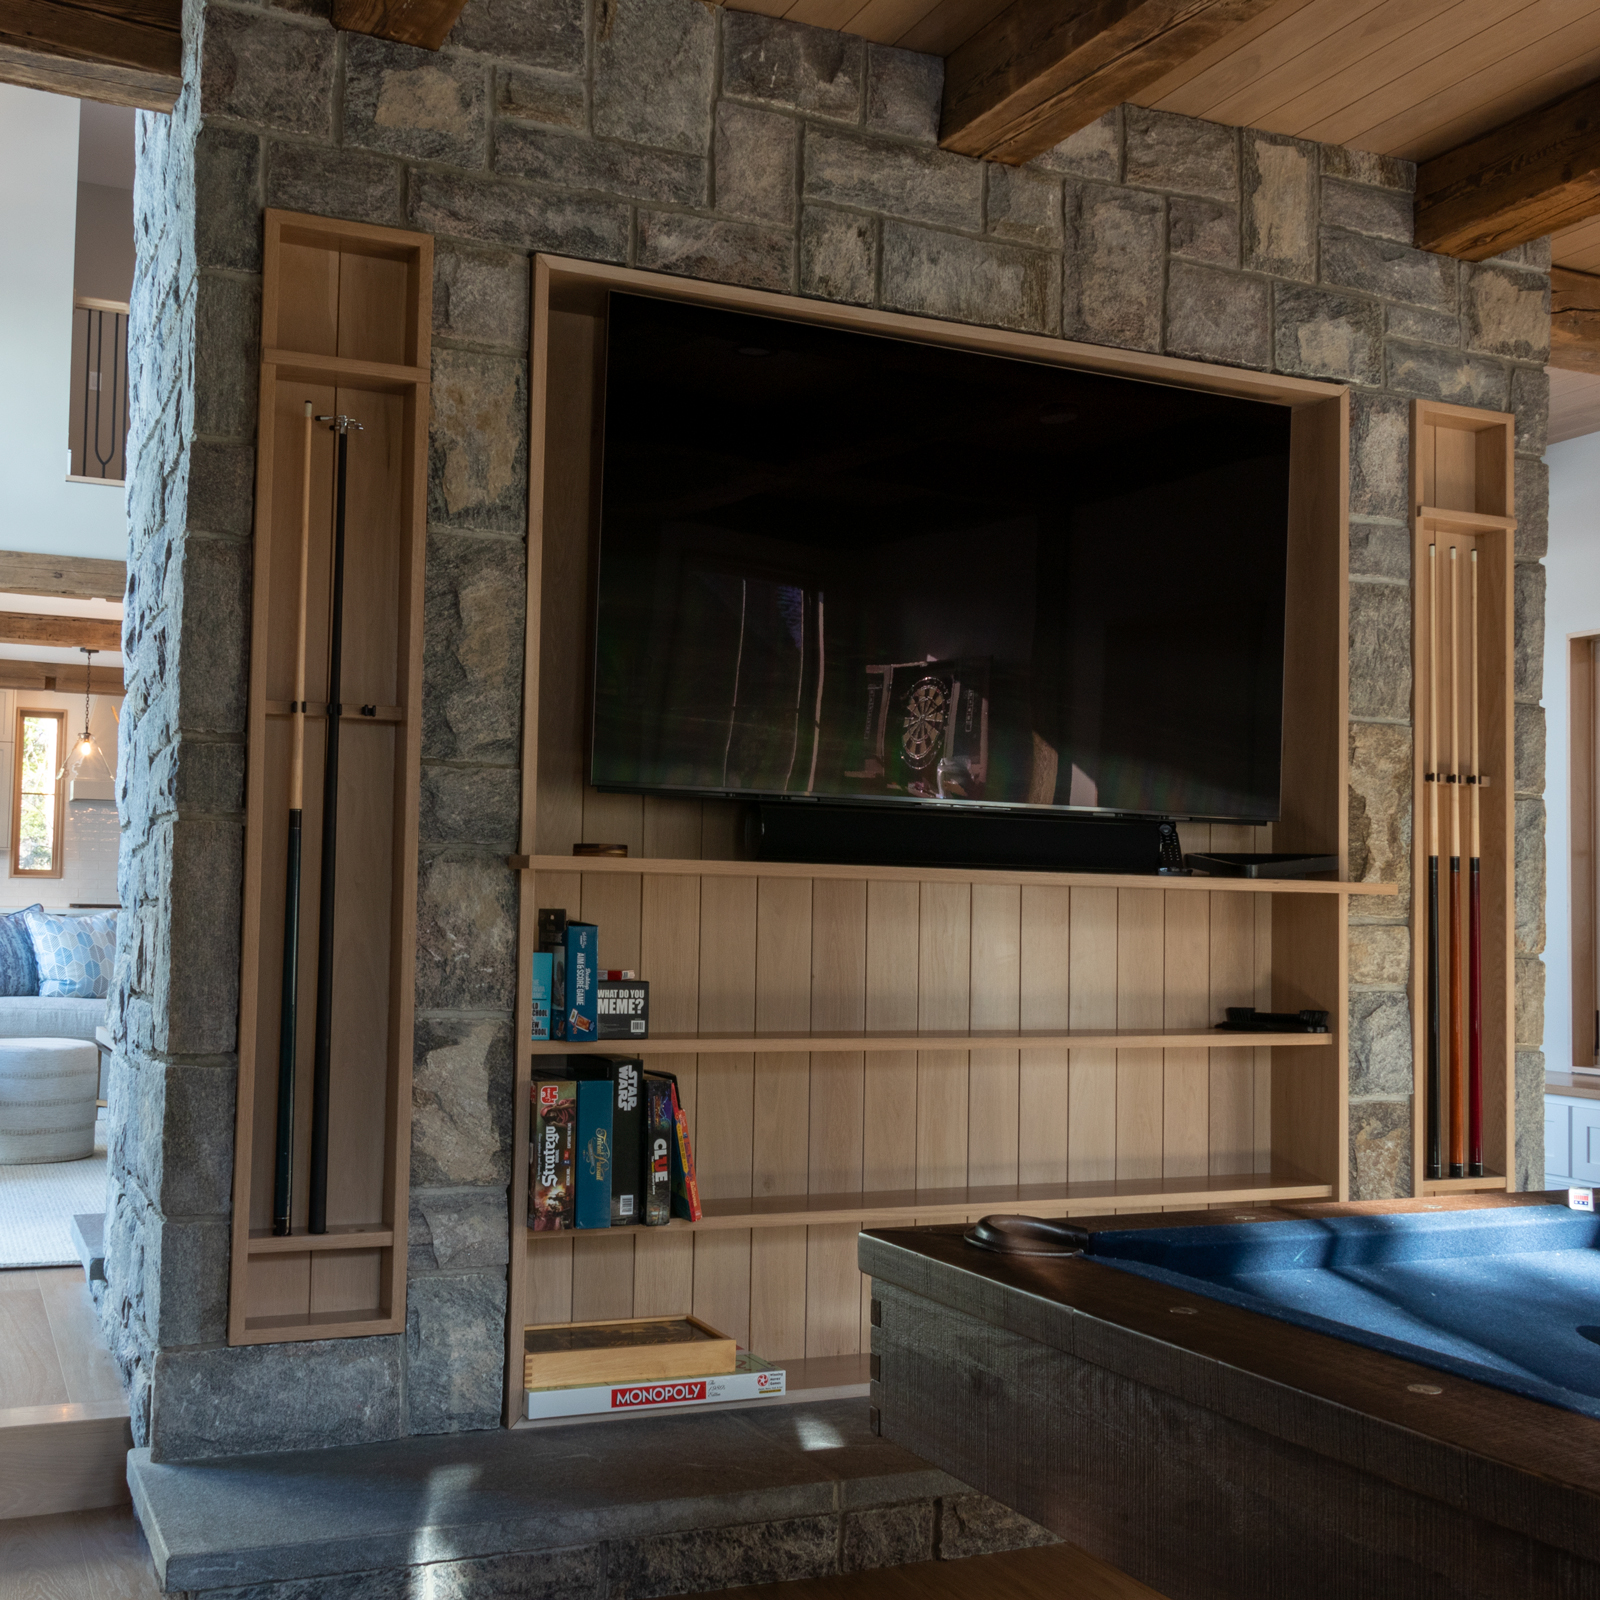 This space features a pool table, dart area, and custom game storage on the back side of the fireplace. The storage area was custom built out of white oak to hold pool cues, books & board games, pool accessories, and a large tv for watching the game while you play a round with some friends.